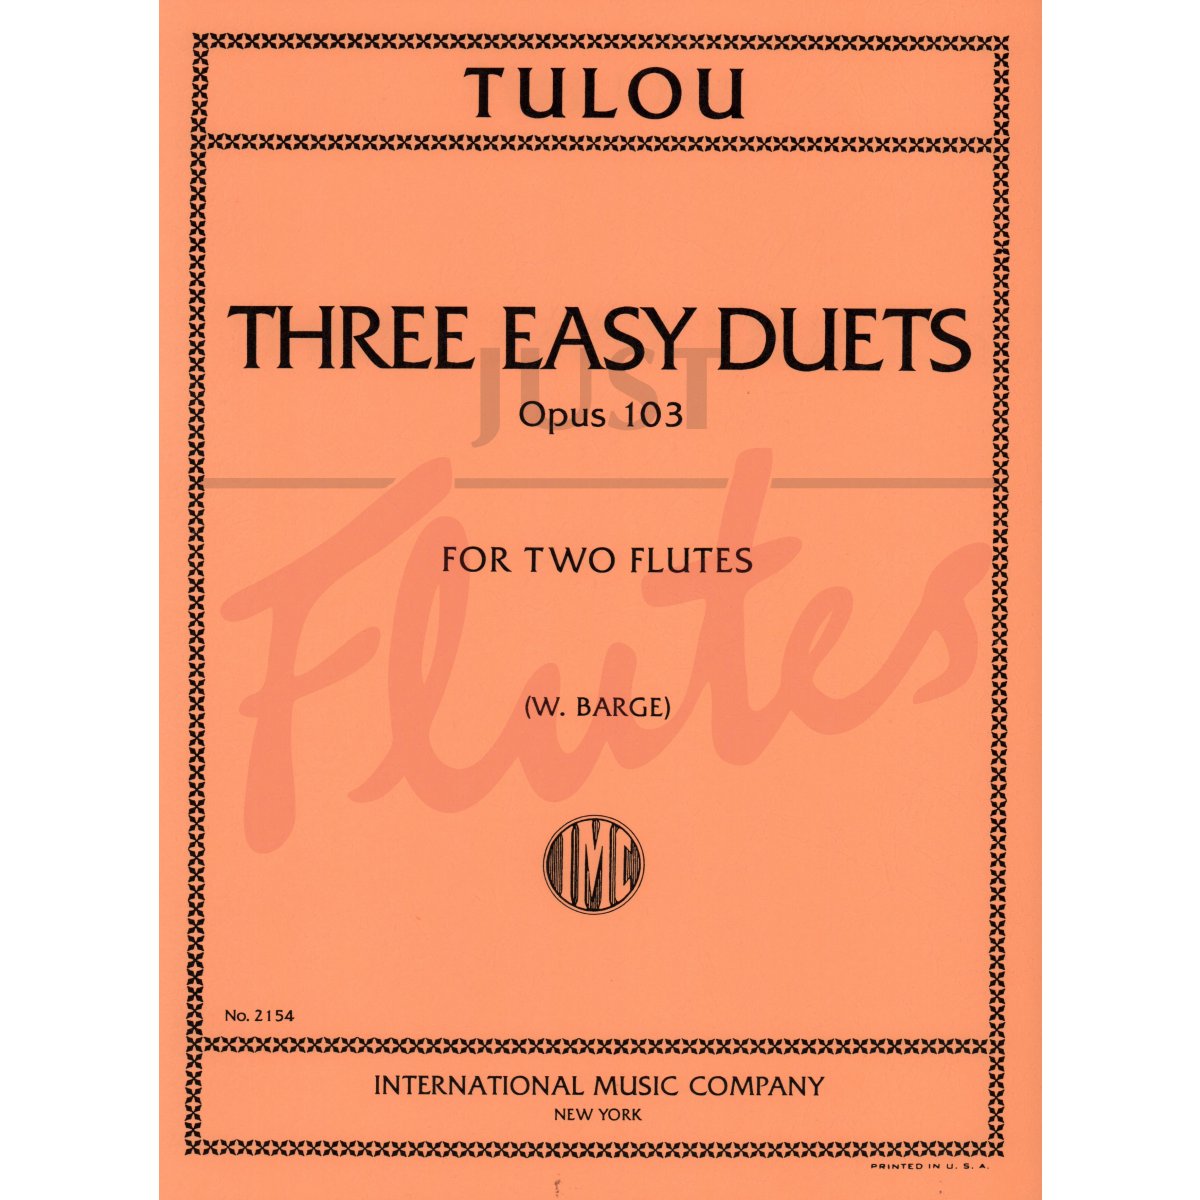 Three Easy Duets for Two Flutes